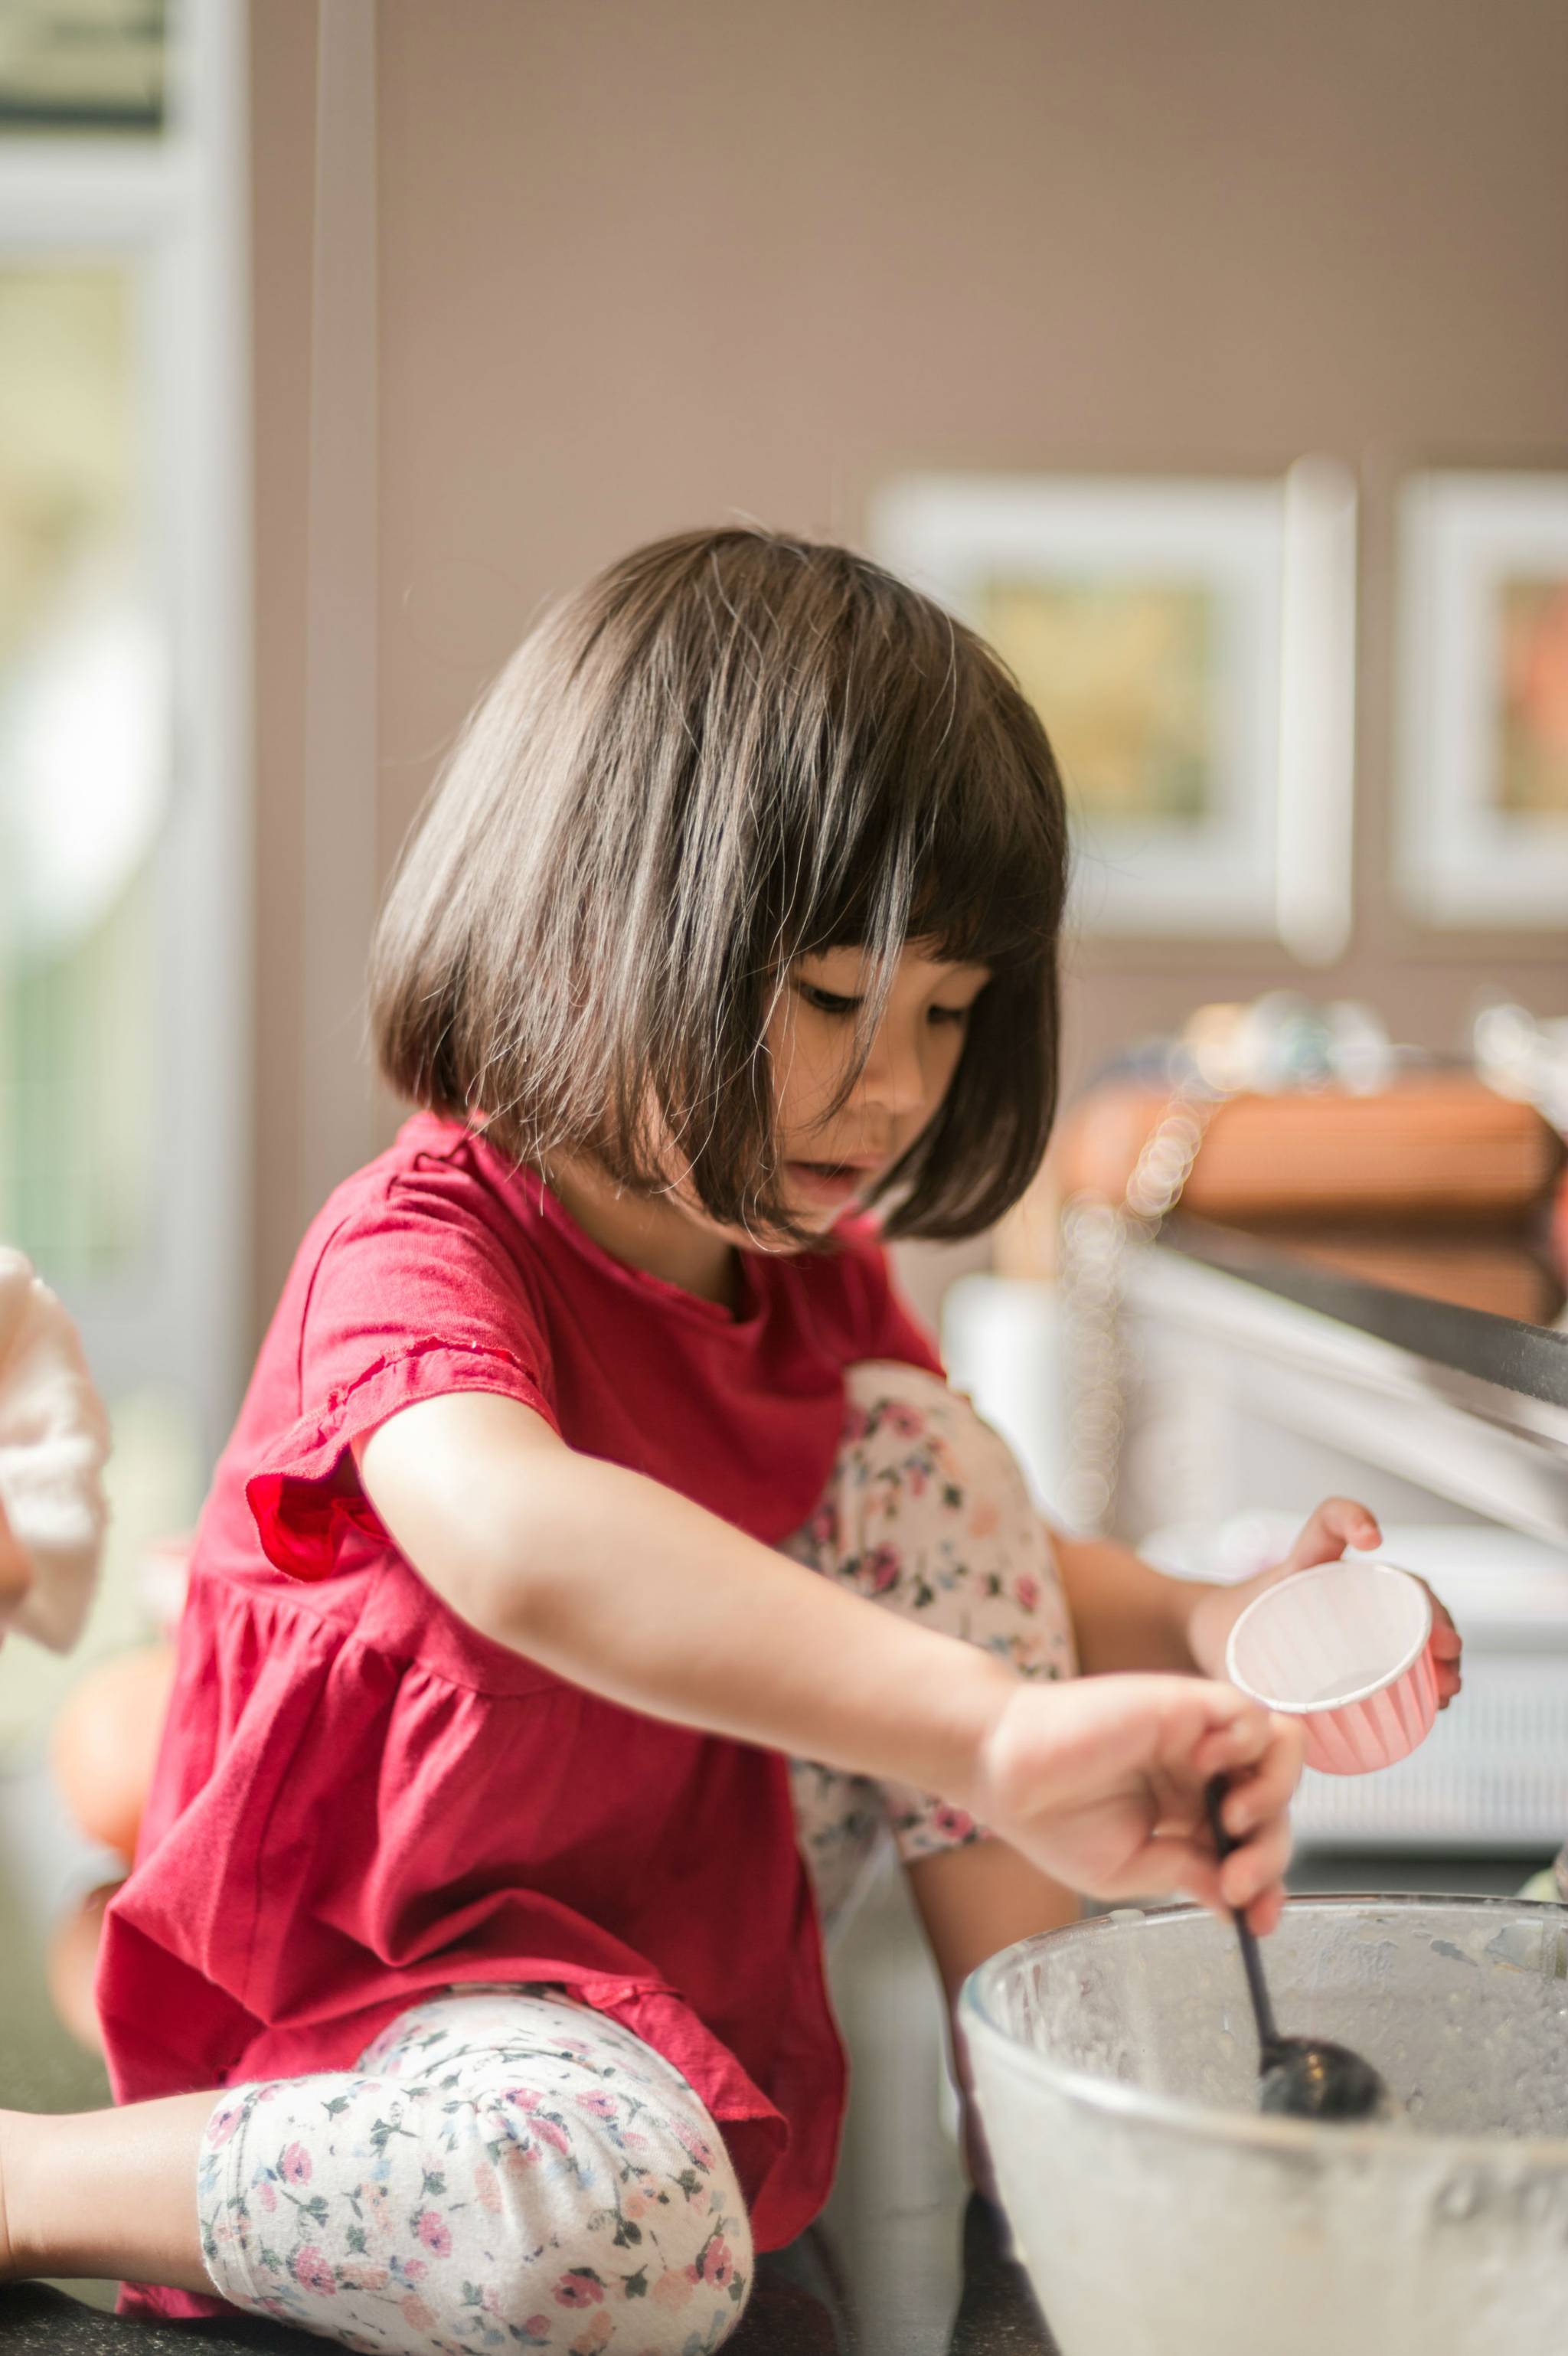 Chefclub Kids: the cooking tutorials uniting families